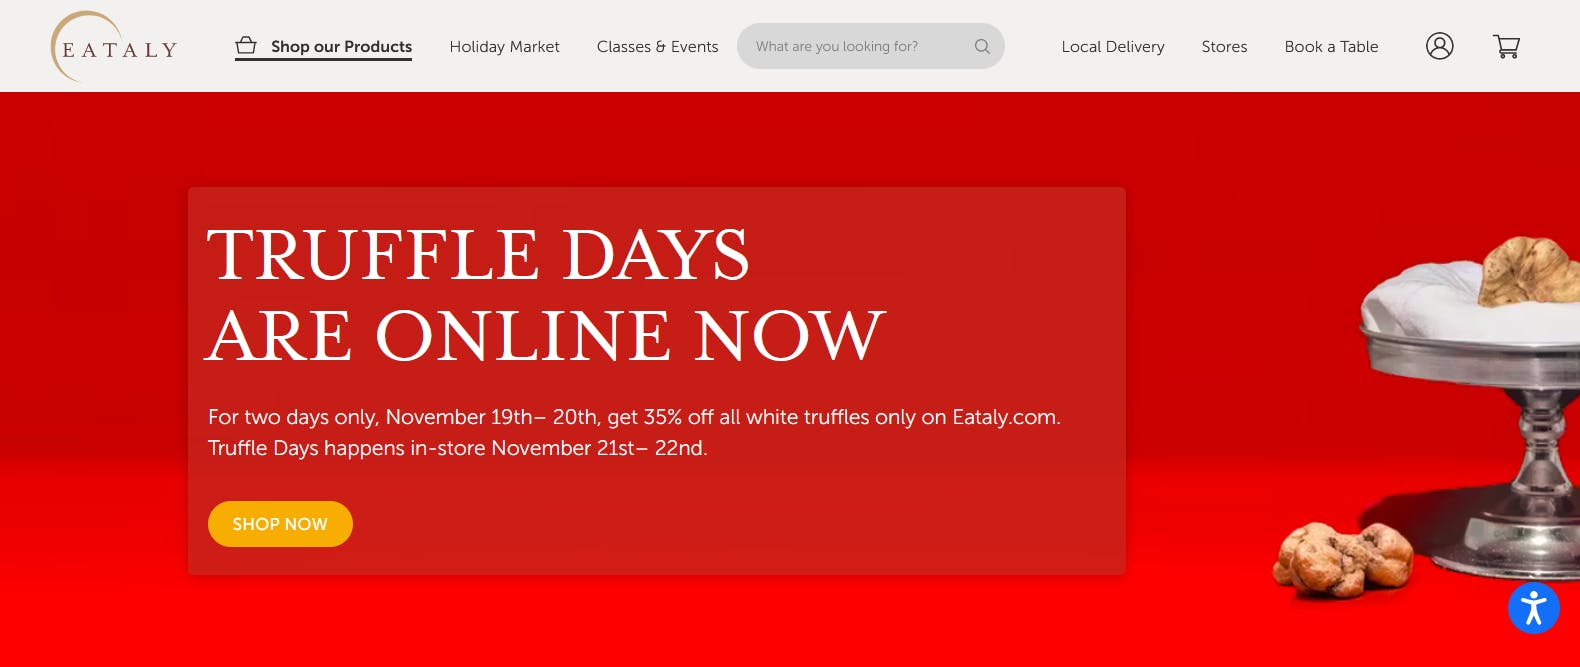 Eataly's website, built with Prismic